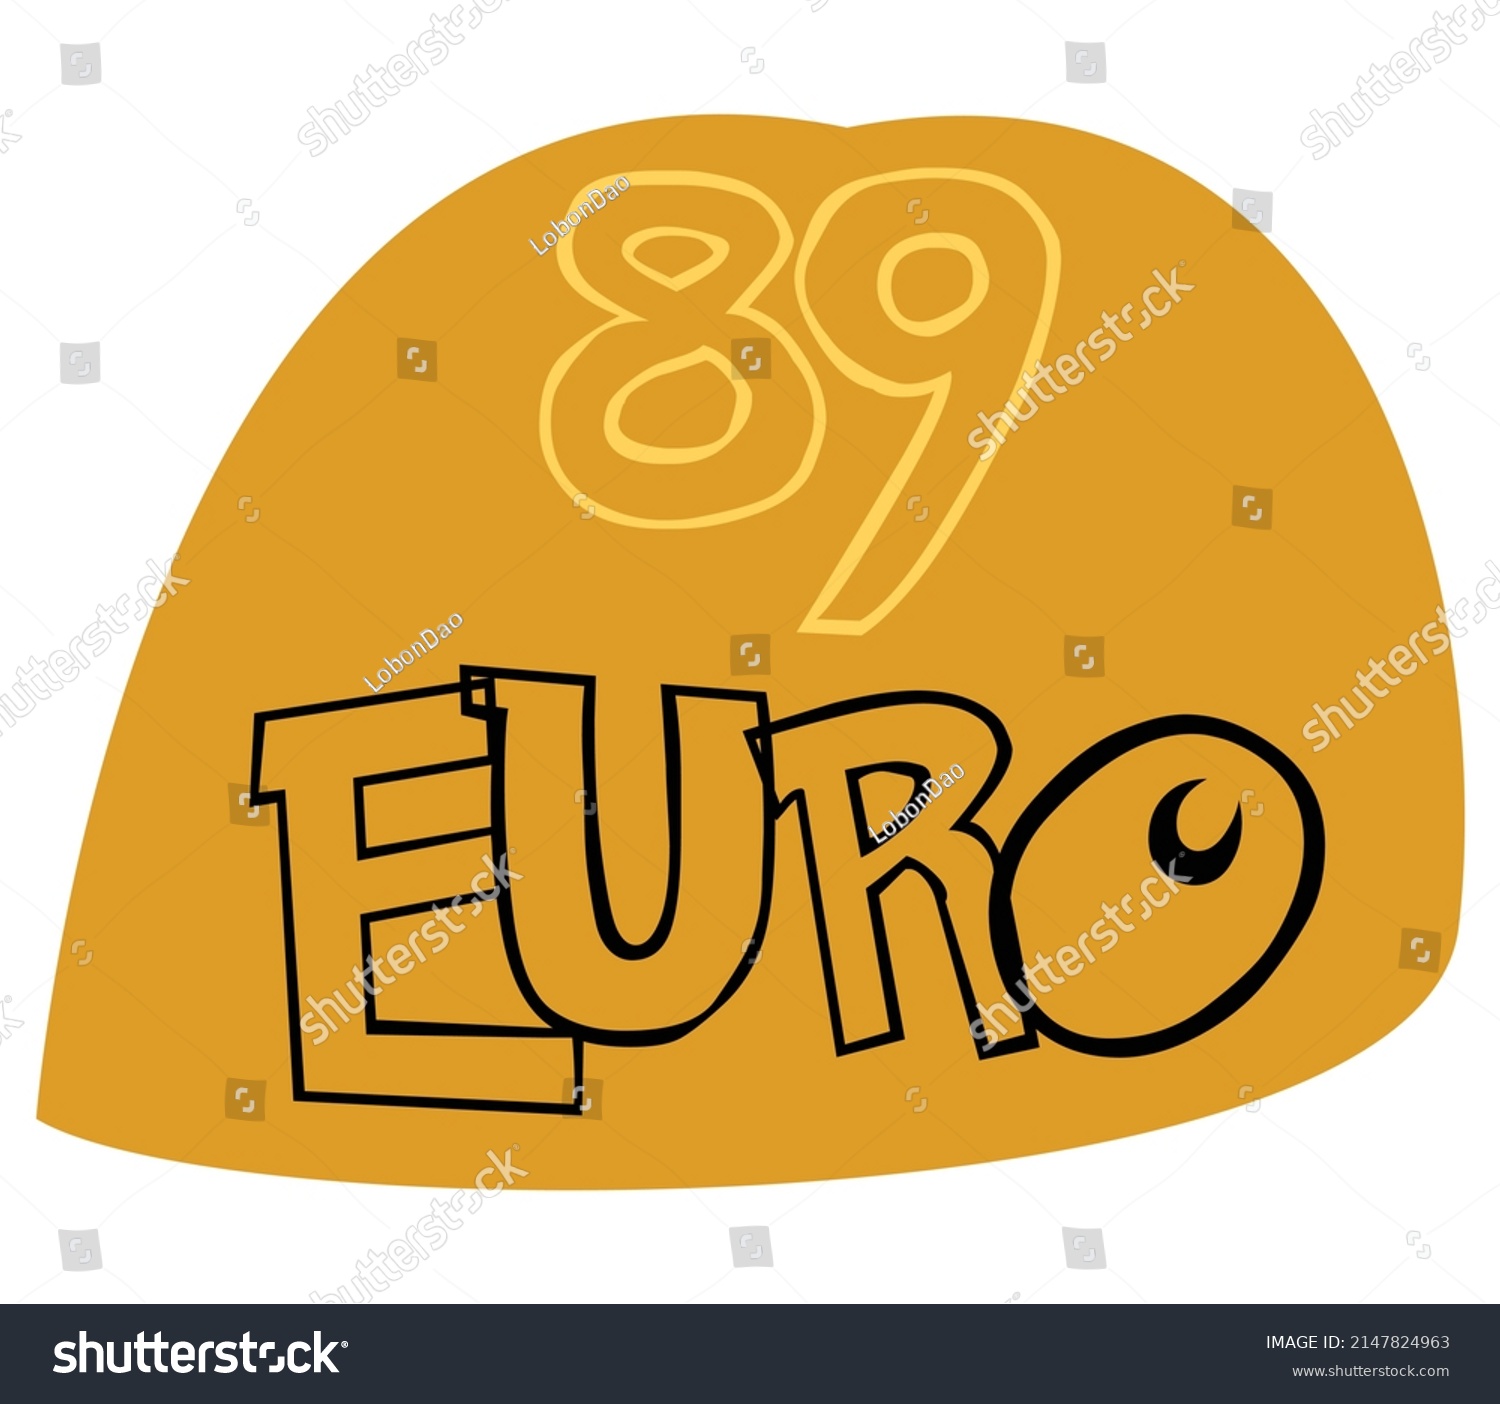 89Euro Symbol in a button mode, 2d vector illustration #2147824963